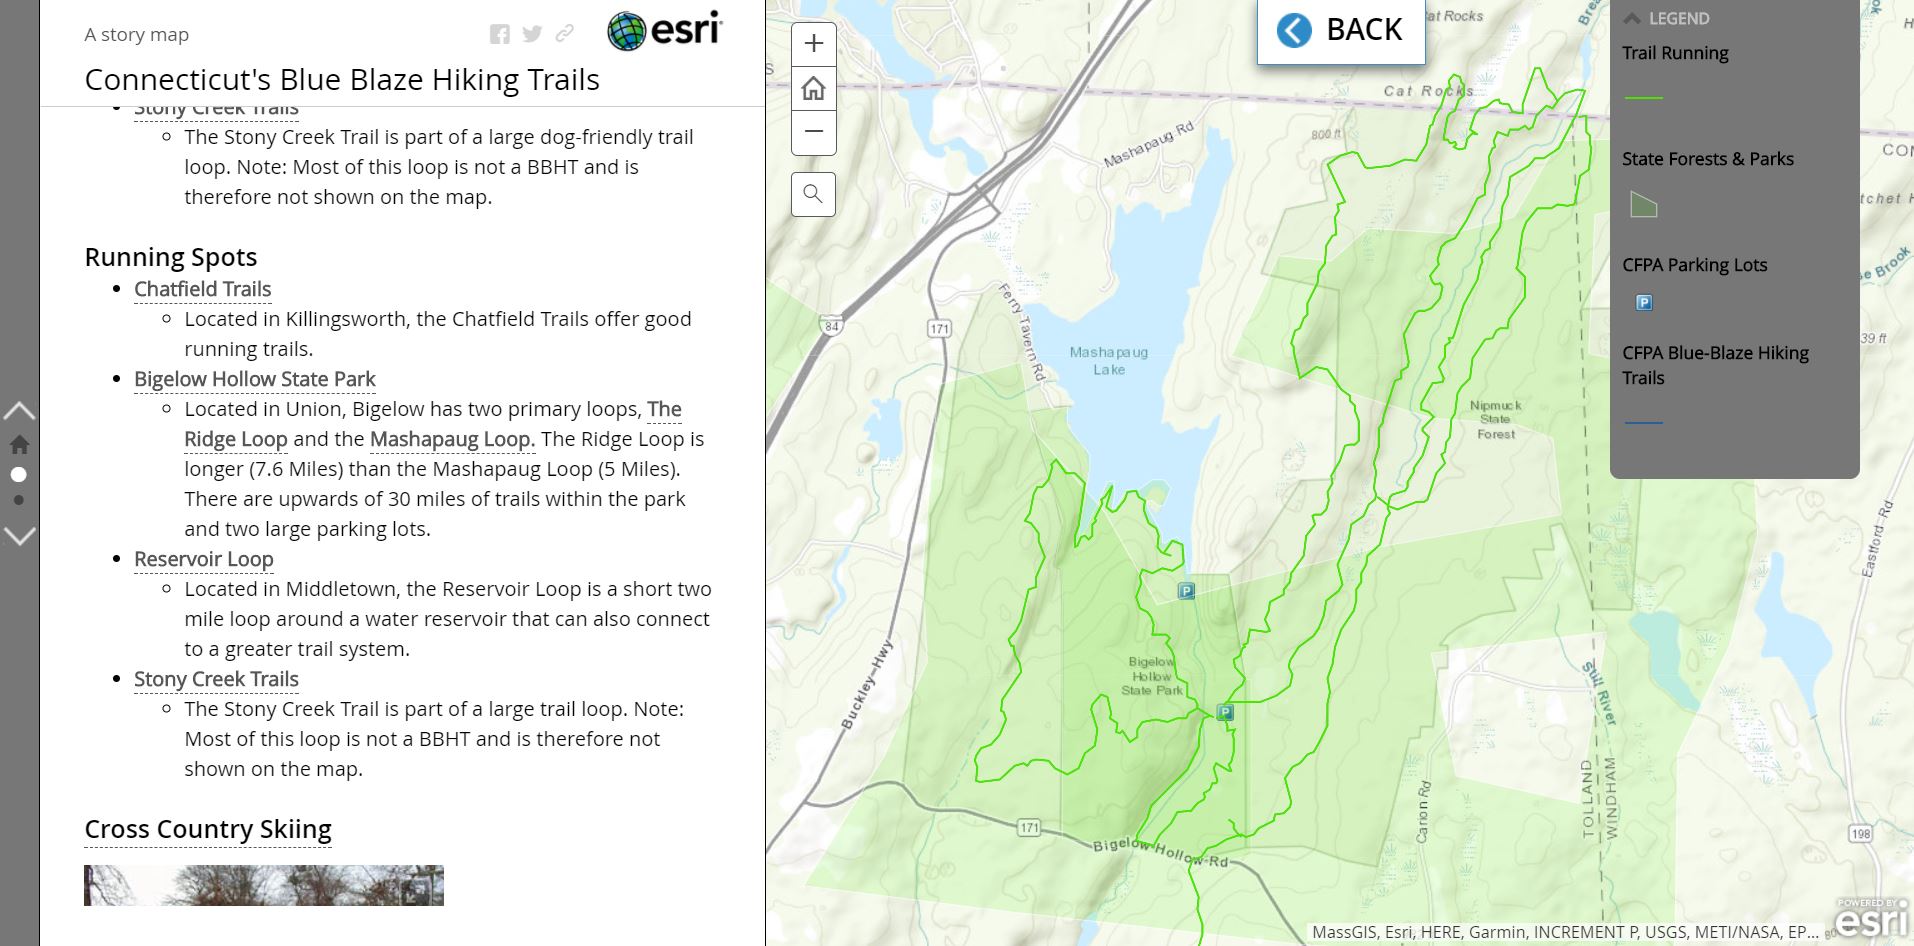 The recreation group designed a Story Map titled "Connecticut’s Blue-Blazed Hiking Trails. The Blue Blaze Hiking Trails are a series of trails throughout the state totaling 825 miles in distance. Team members Rhoen Fiutak ’19 and Sarah Mount ’20 created a Story Map that offers a glimpse of recreational sites near the trail system.